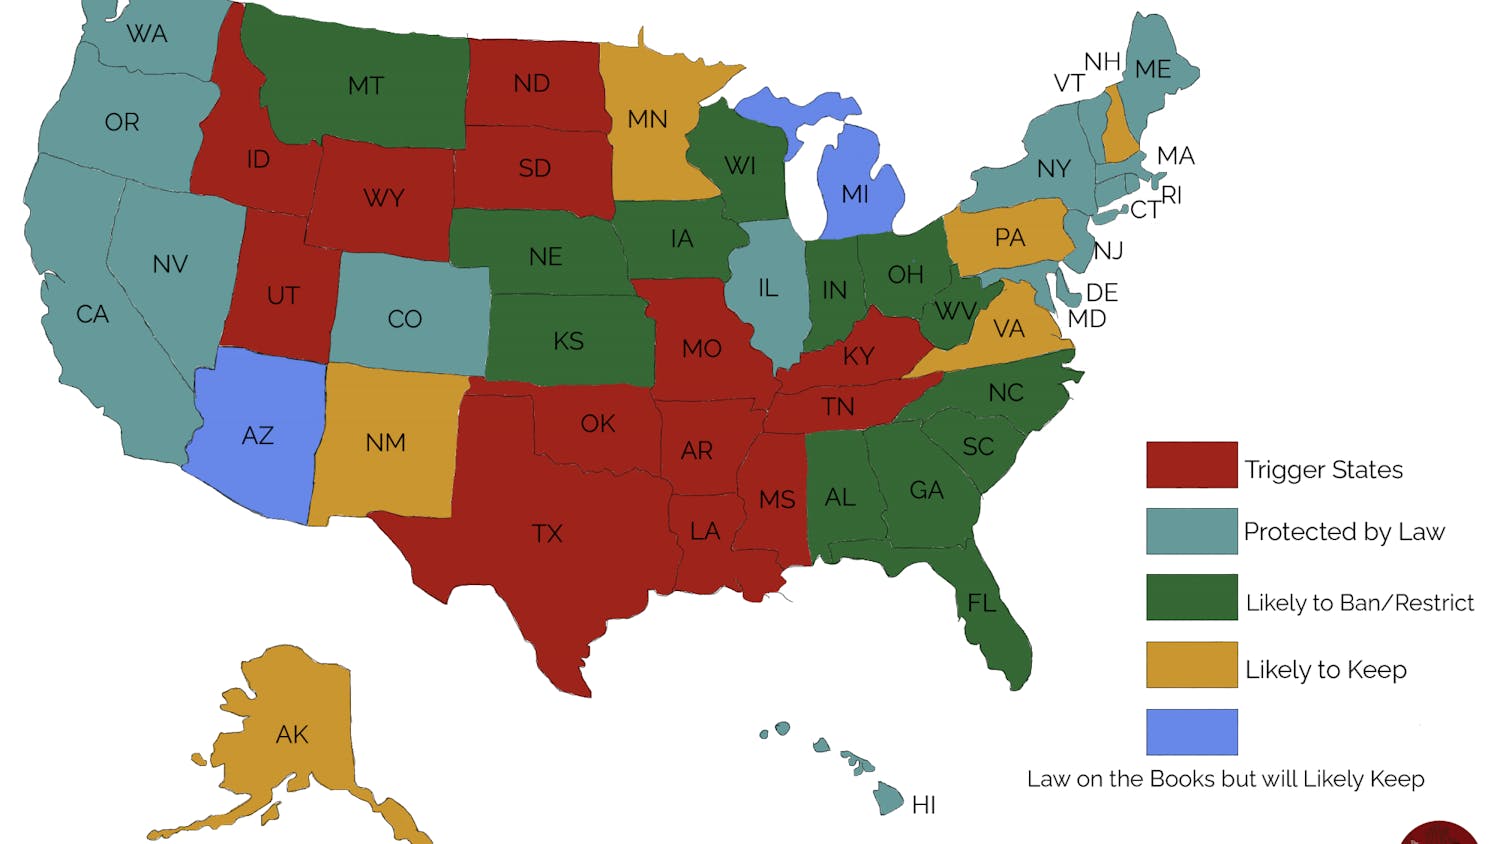 A graphic of the U.S. map that shows what each state is likely to do if Roe v. Wade is overturned.